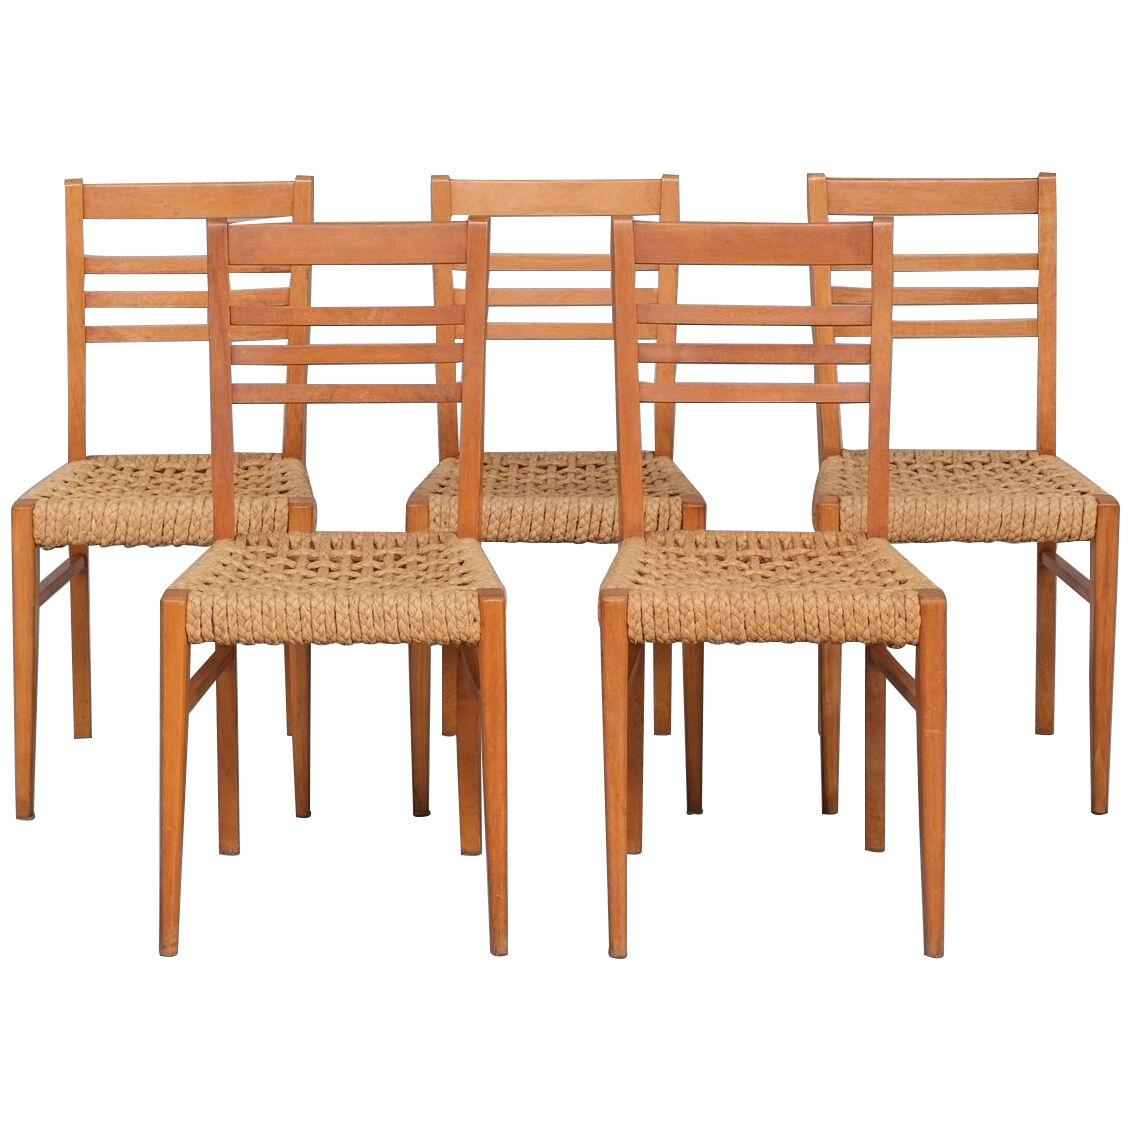 French Mid-Century Rope Dining Chairs attr. to Audoux-Minet